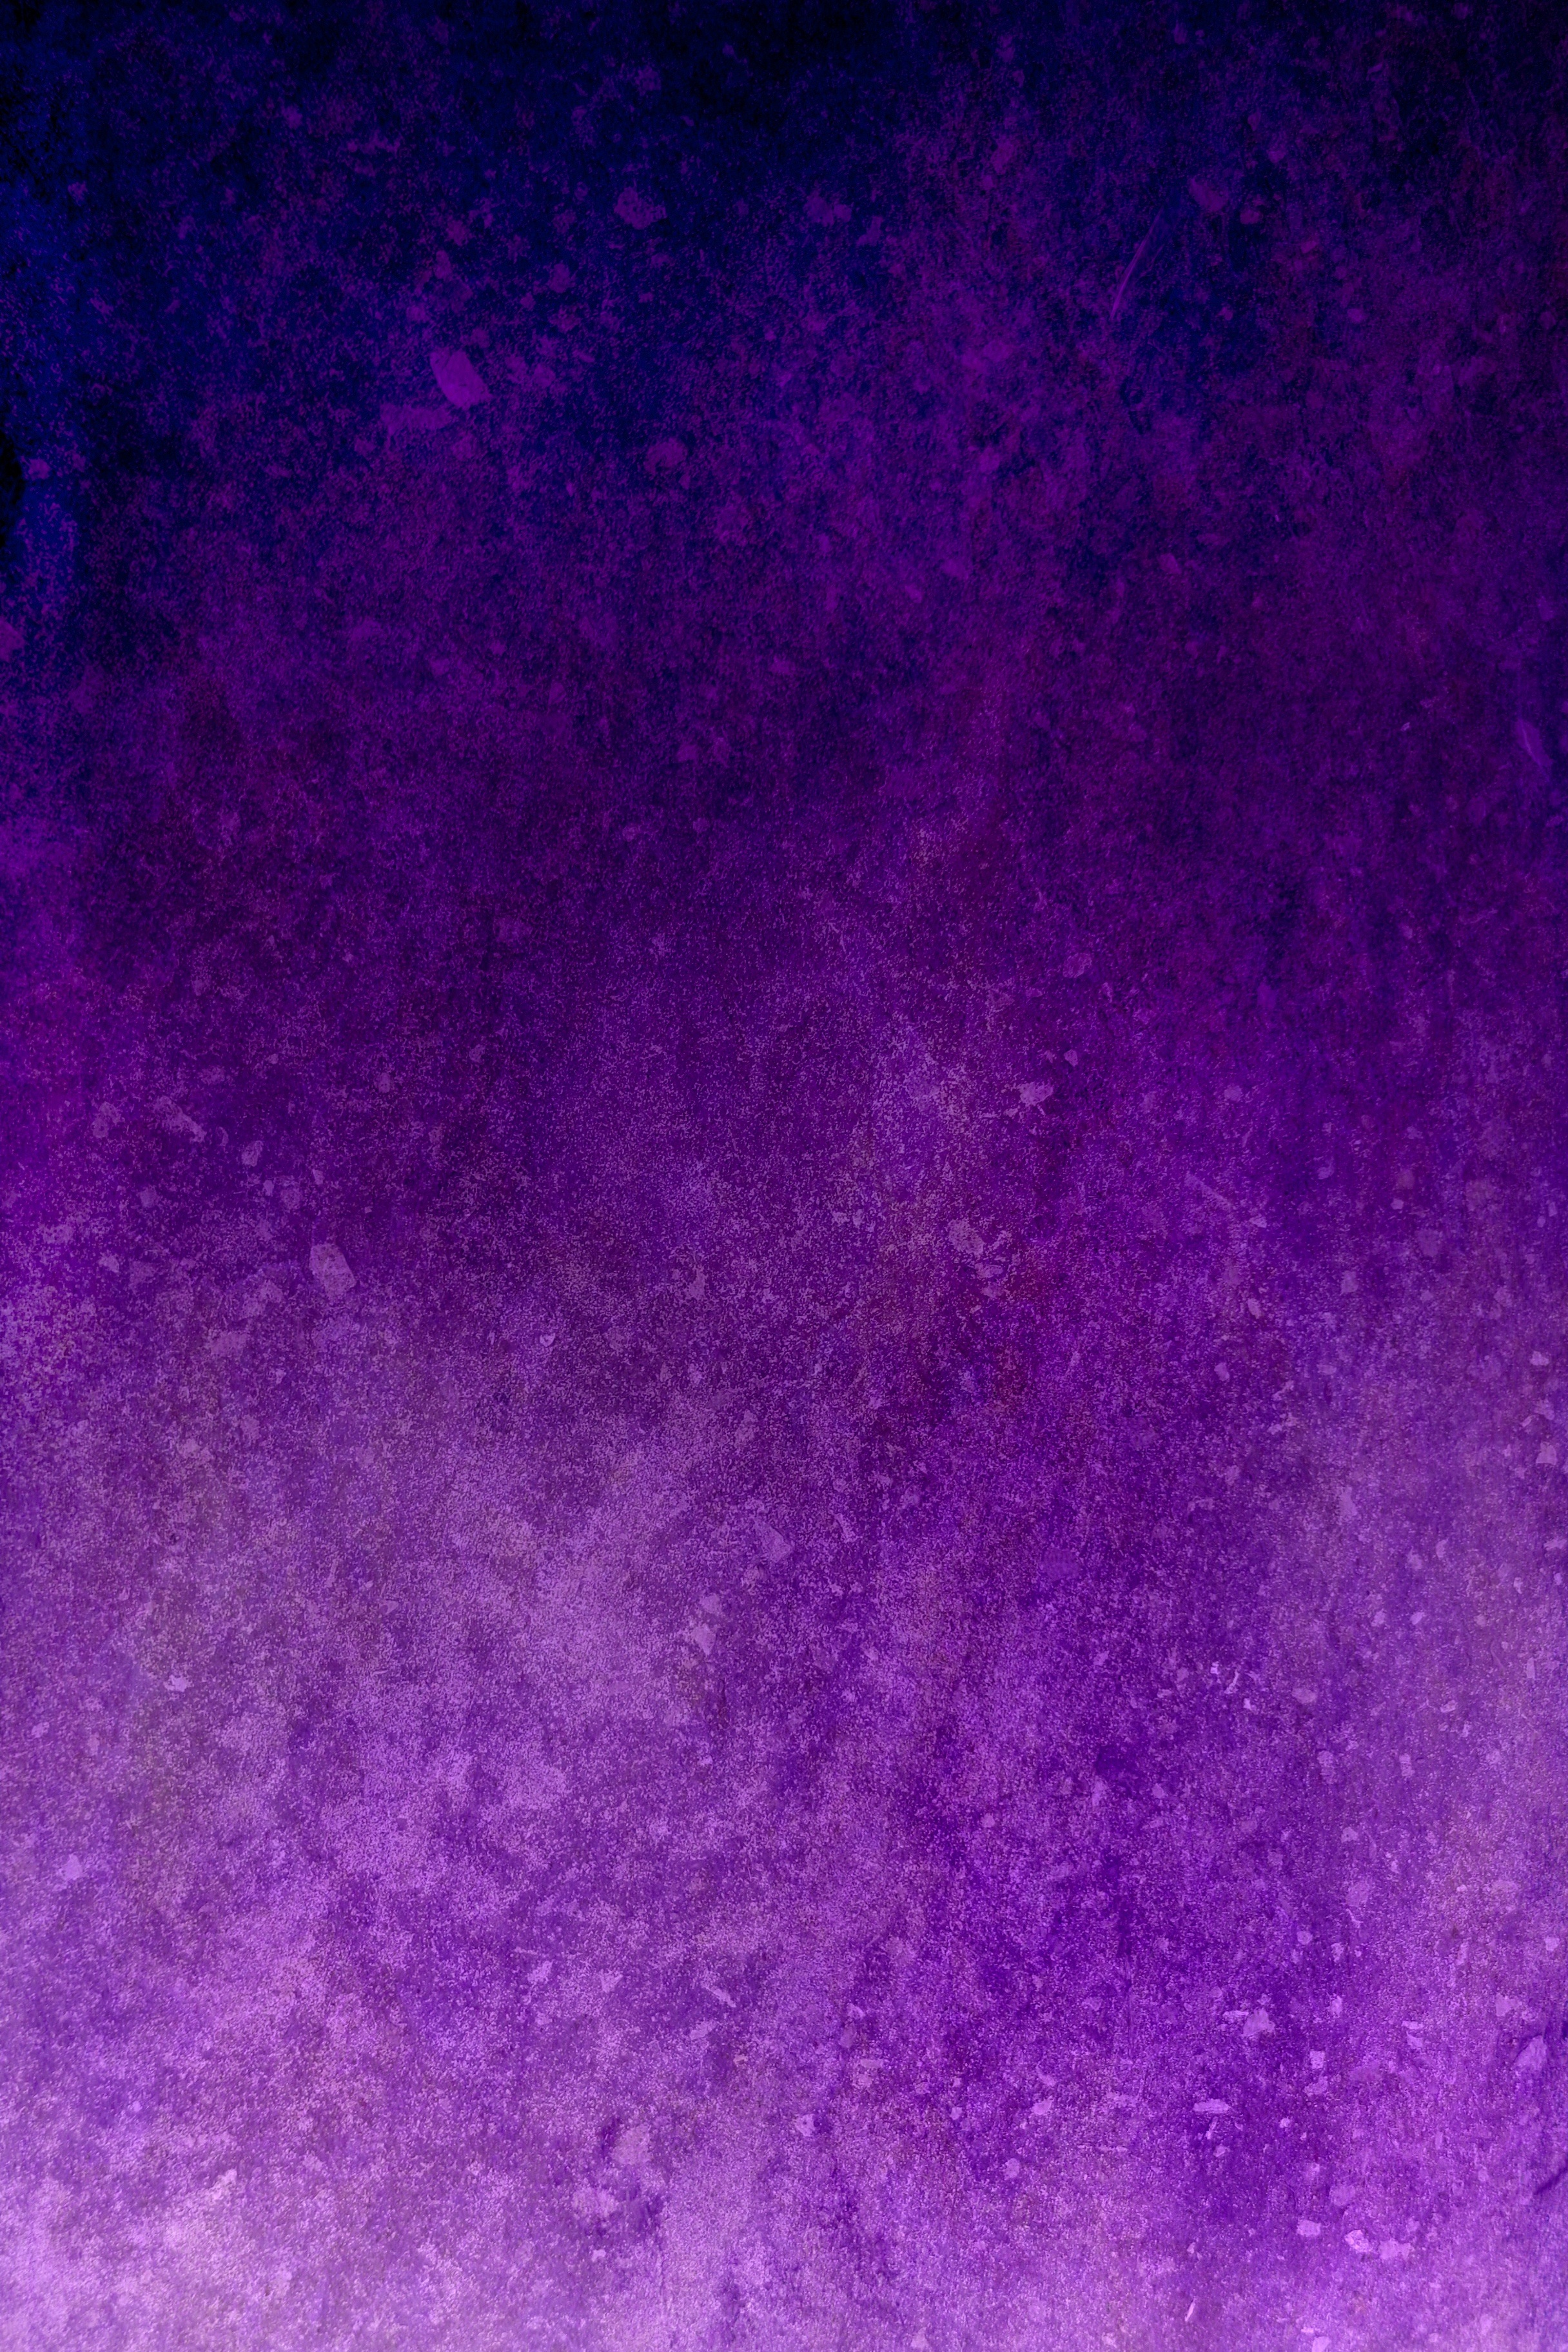 purple, violet, tint, textures, texture, background, stains, spots, shade